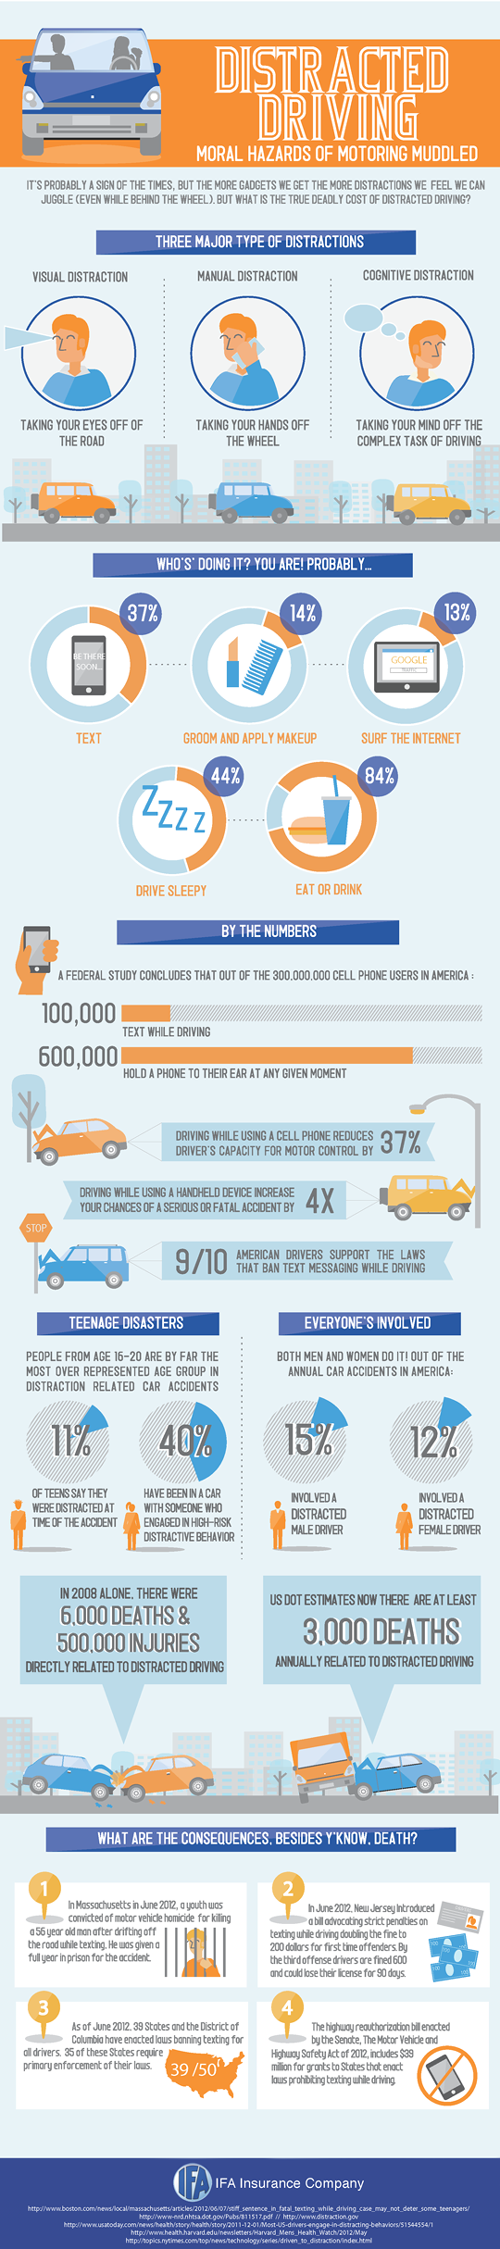 Texting as an emerging driving distraction